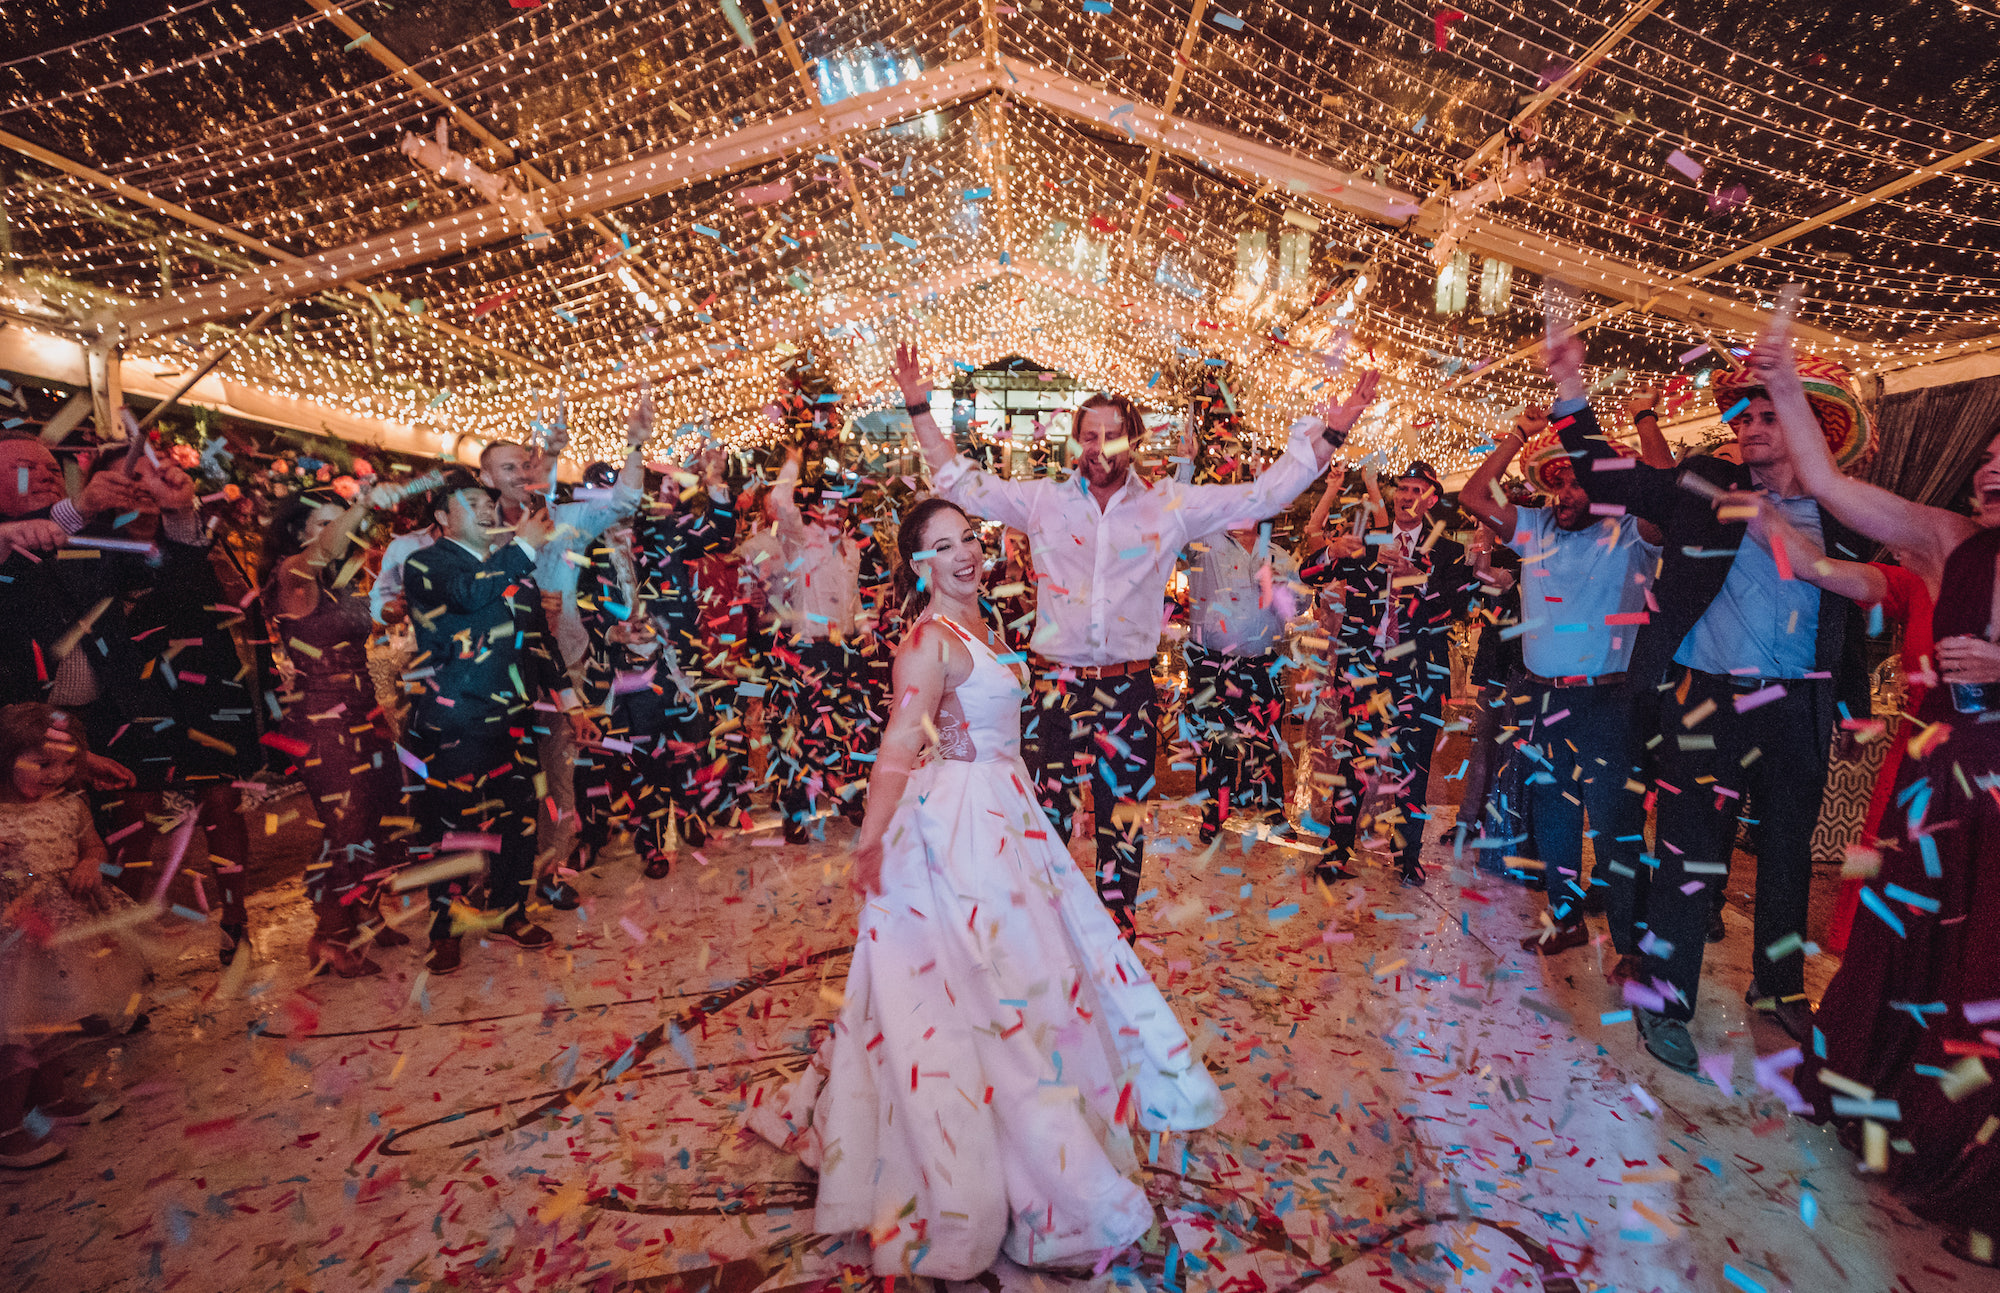 Colorful confetti is in the air while wedding guests cheer for the bride and groom at a wedding in Houston.